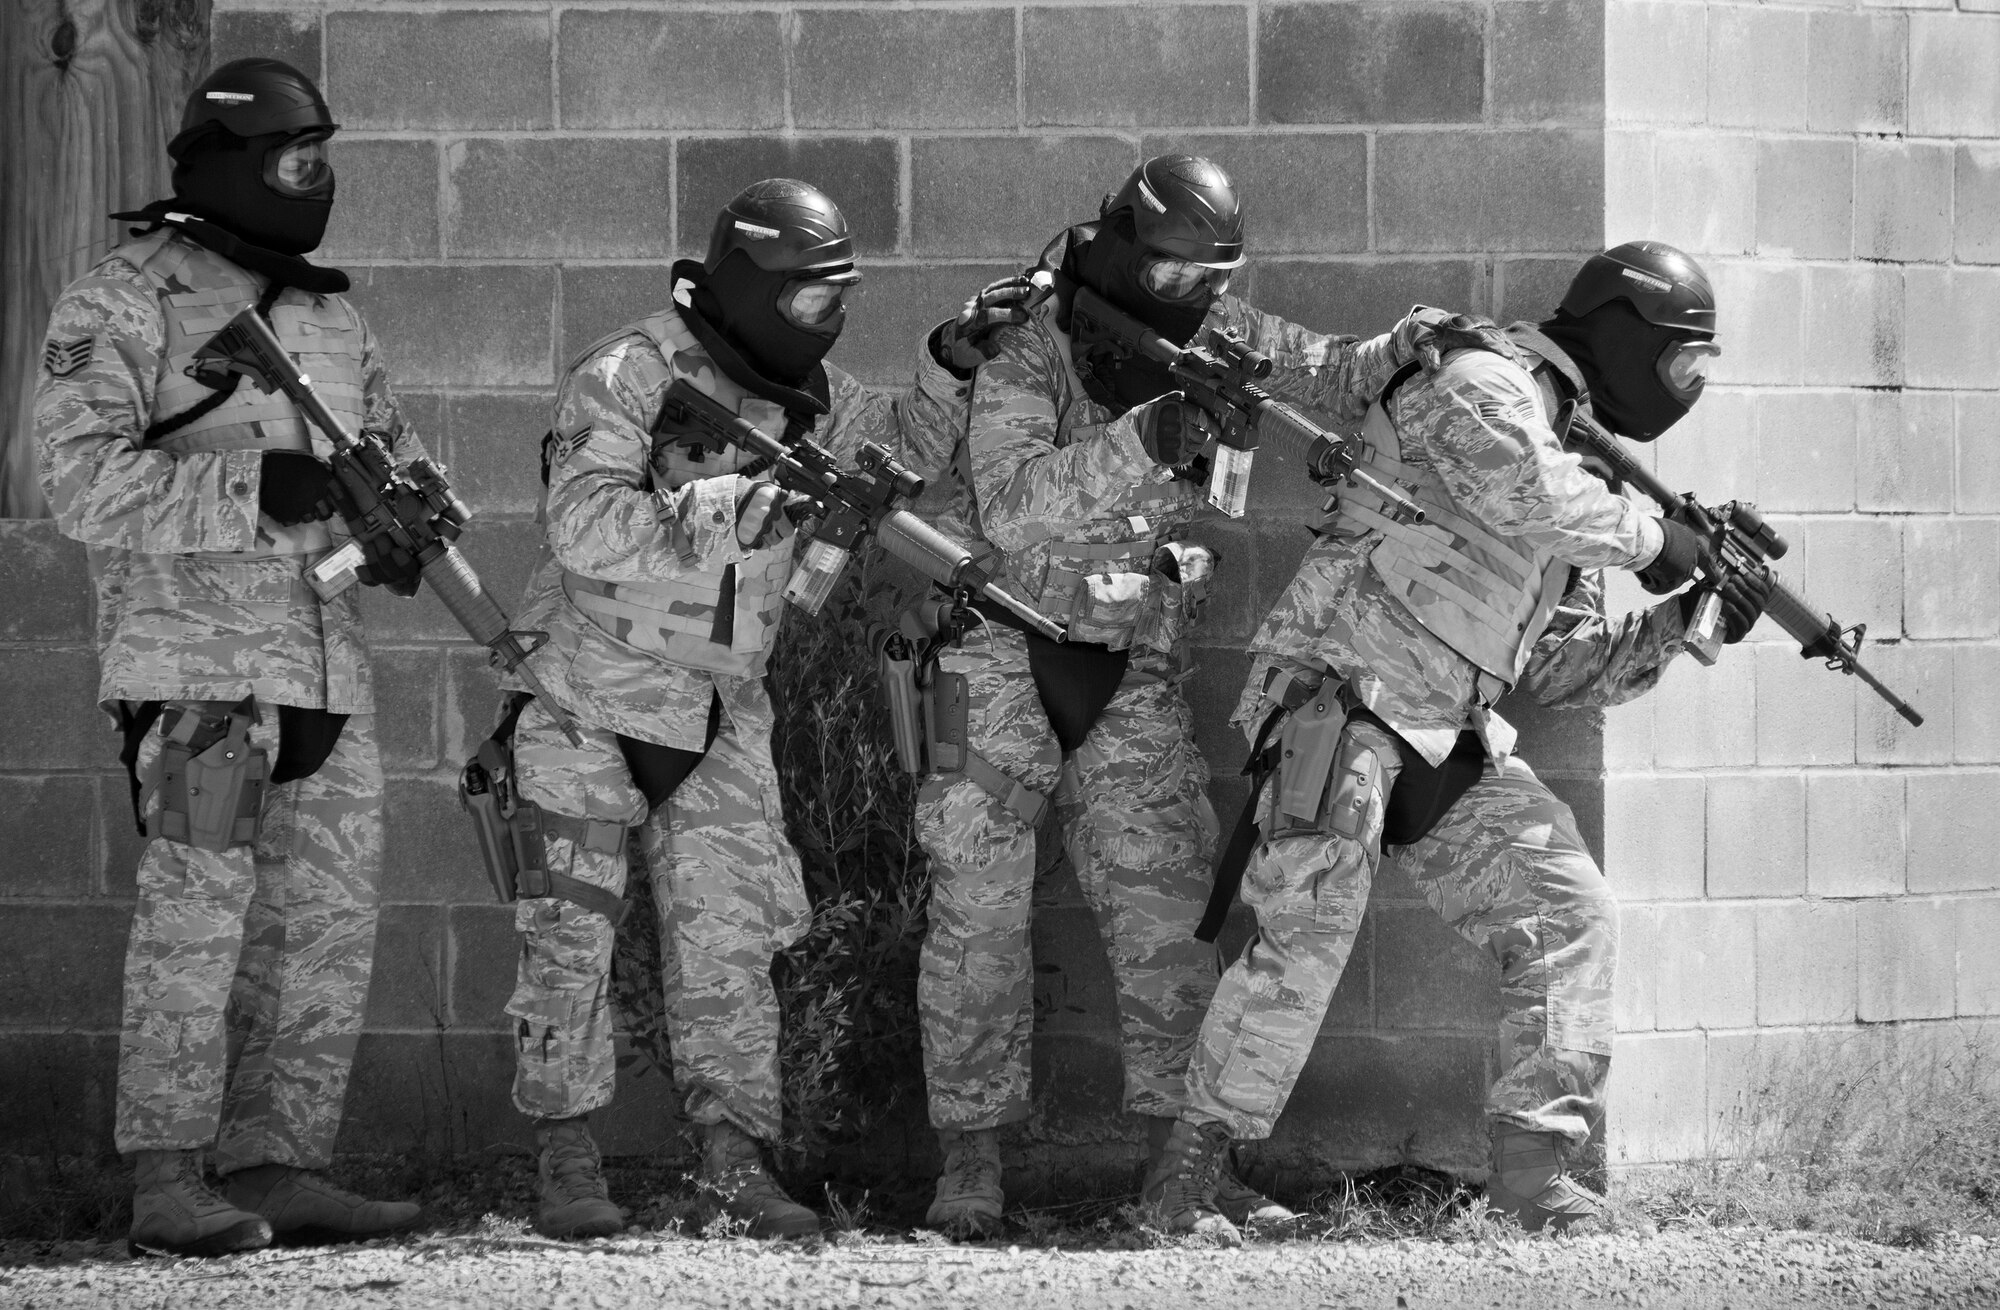 A team of 96th Security Forces Squadron Airmen prepare to enter a building during a shoot, move and communicate drill in June at Eglin Air Force Base, Fla.  The mandatory training requirement is in addition to annual weapons qualification training.  The exercise consists of Airmen firing simmunition ammo while advancing toward, away from and to the side of a target.  This is followed by a building sweep and clear drill.  Eglin’s security forces personnel protect and defend the main base, facilities, gates, Duke Field, 7th SFG compound and land and water ranges.  (U.S. Air Force photo/Tech. Sgt. Sam King)